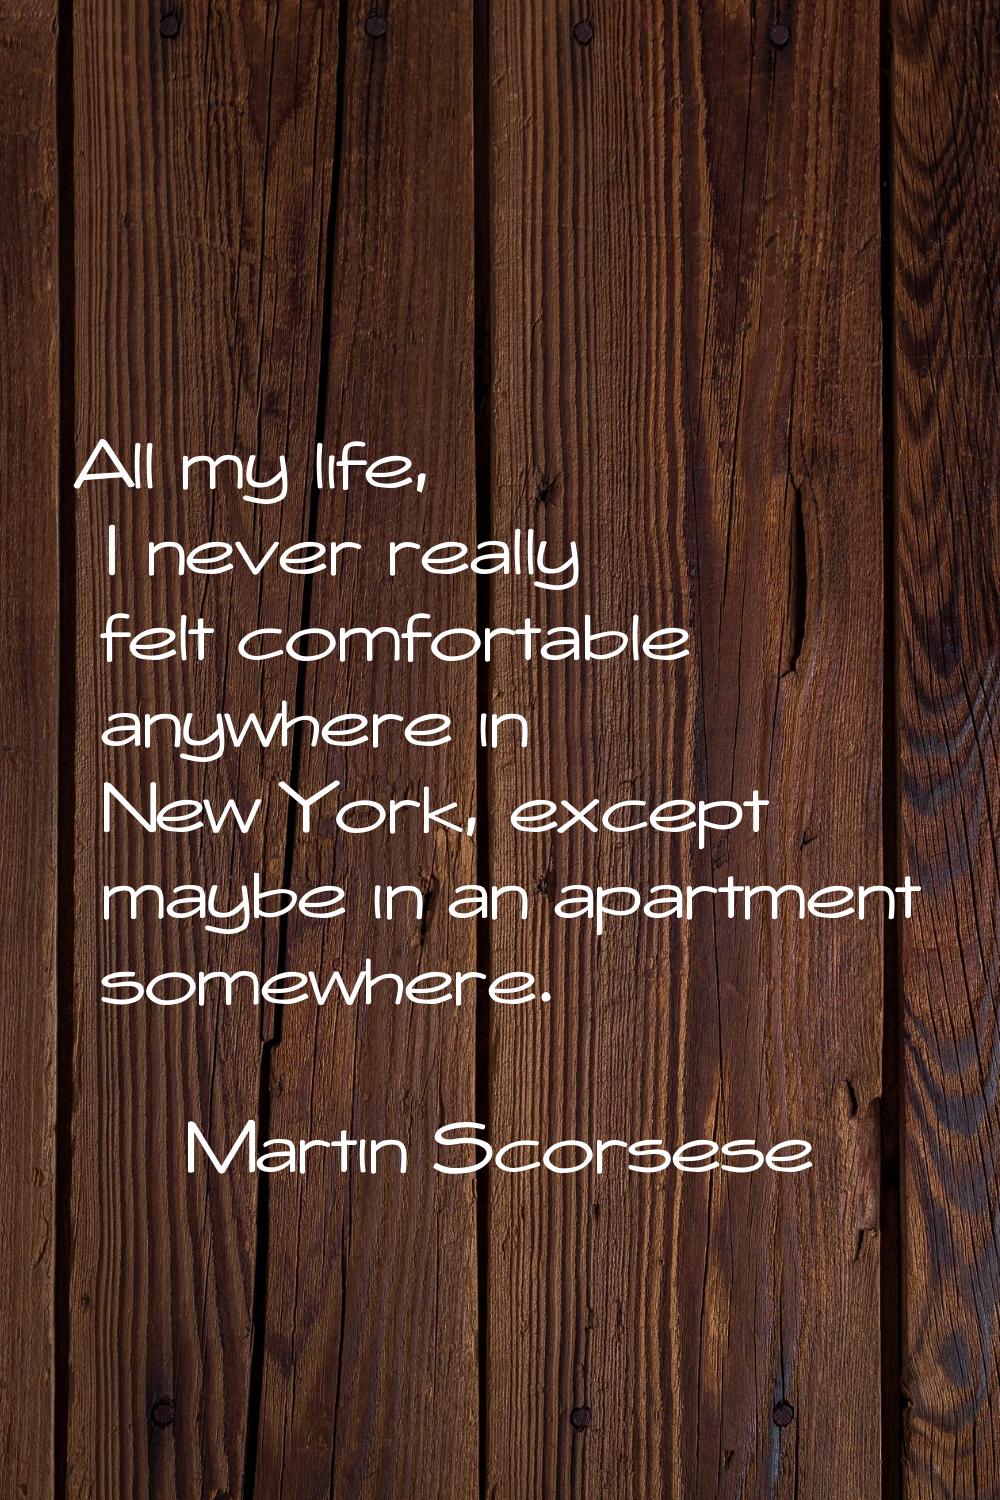 All my life, I never really felt comfortable anywhere in New York, except maybe in an apartment som